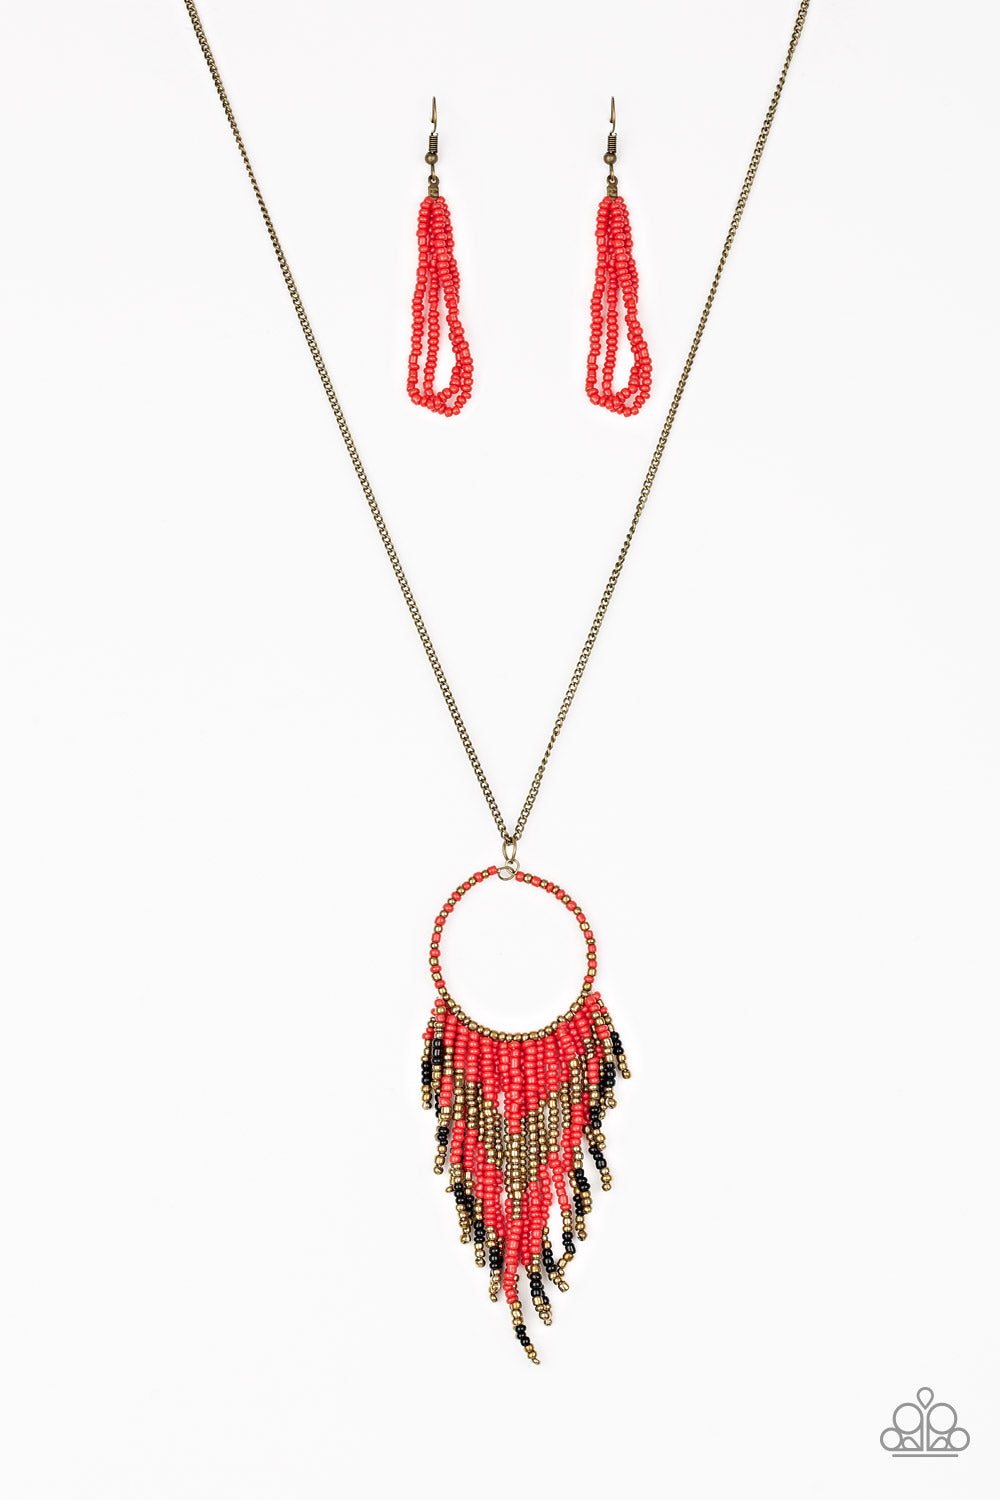 Paparazzi Accessories Badlands Beauty Red Necklace & Earrings